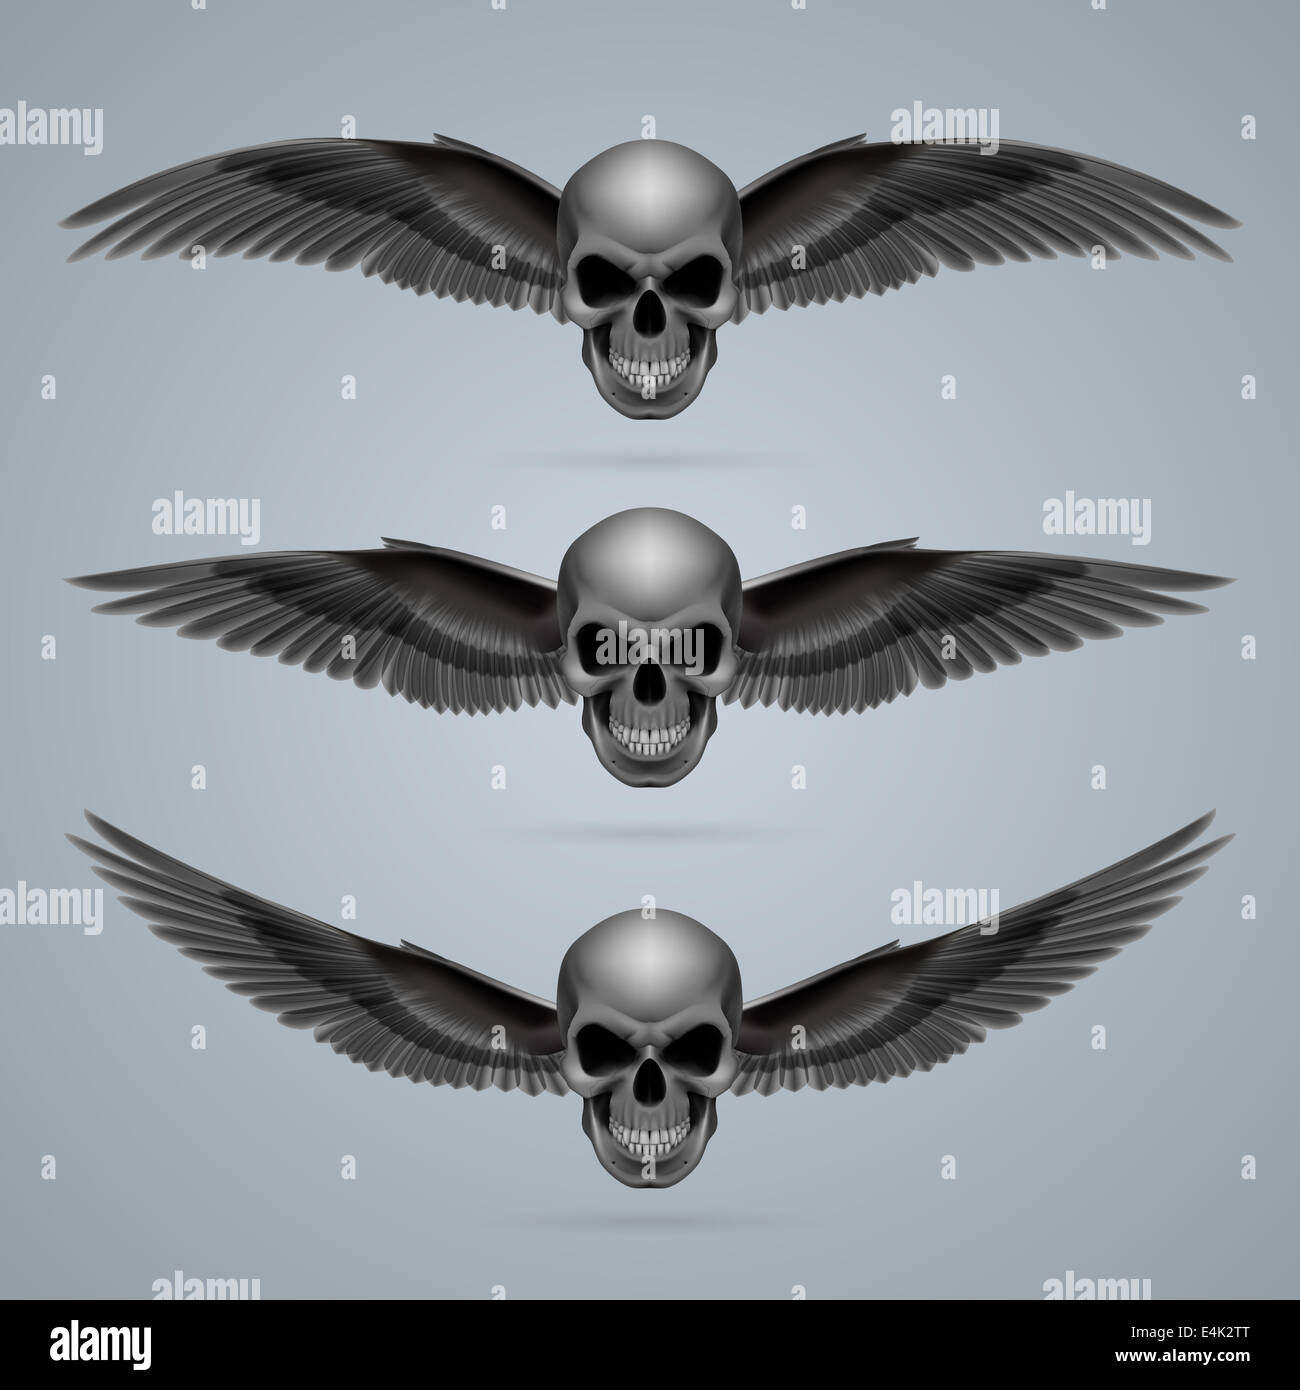 Three evil looking skulls with two wings each. Stock Photo